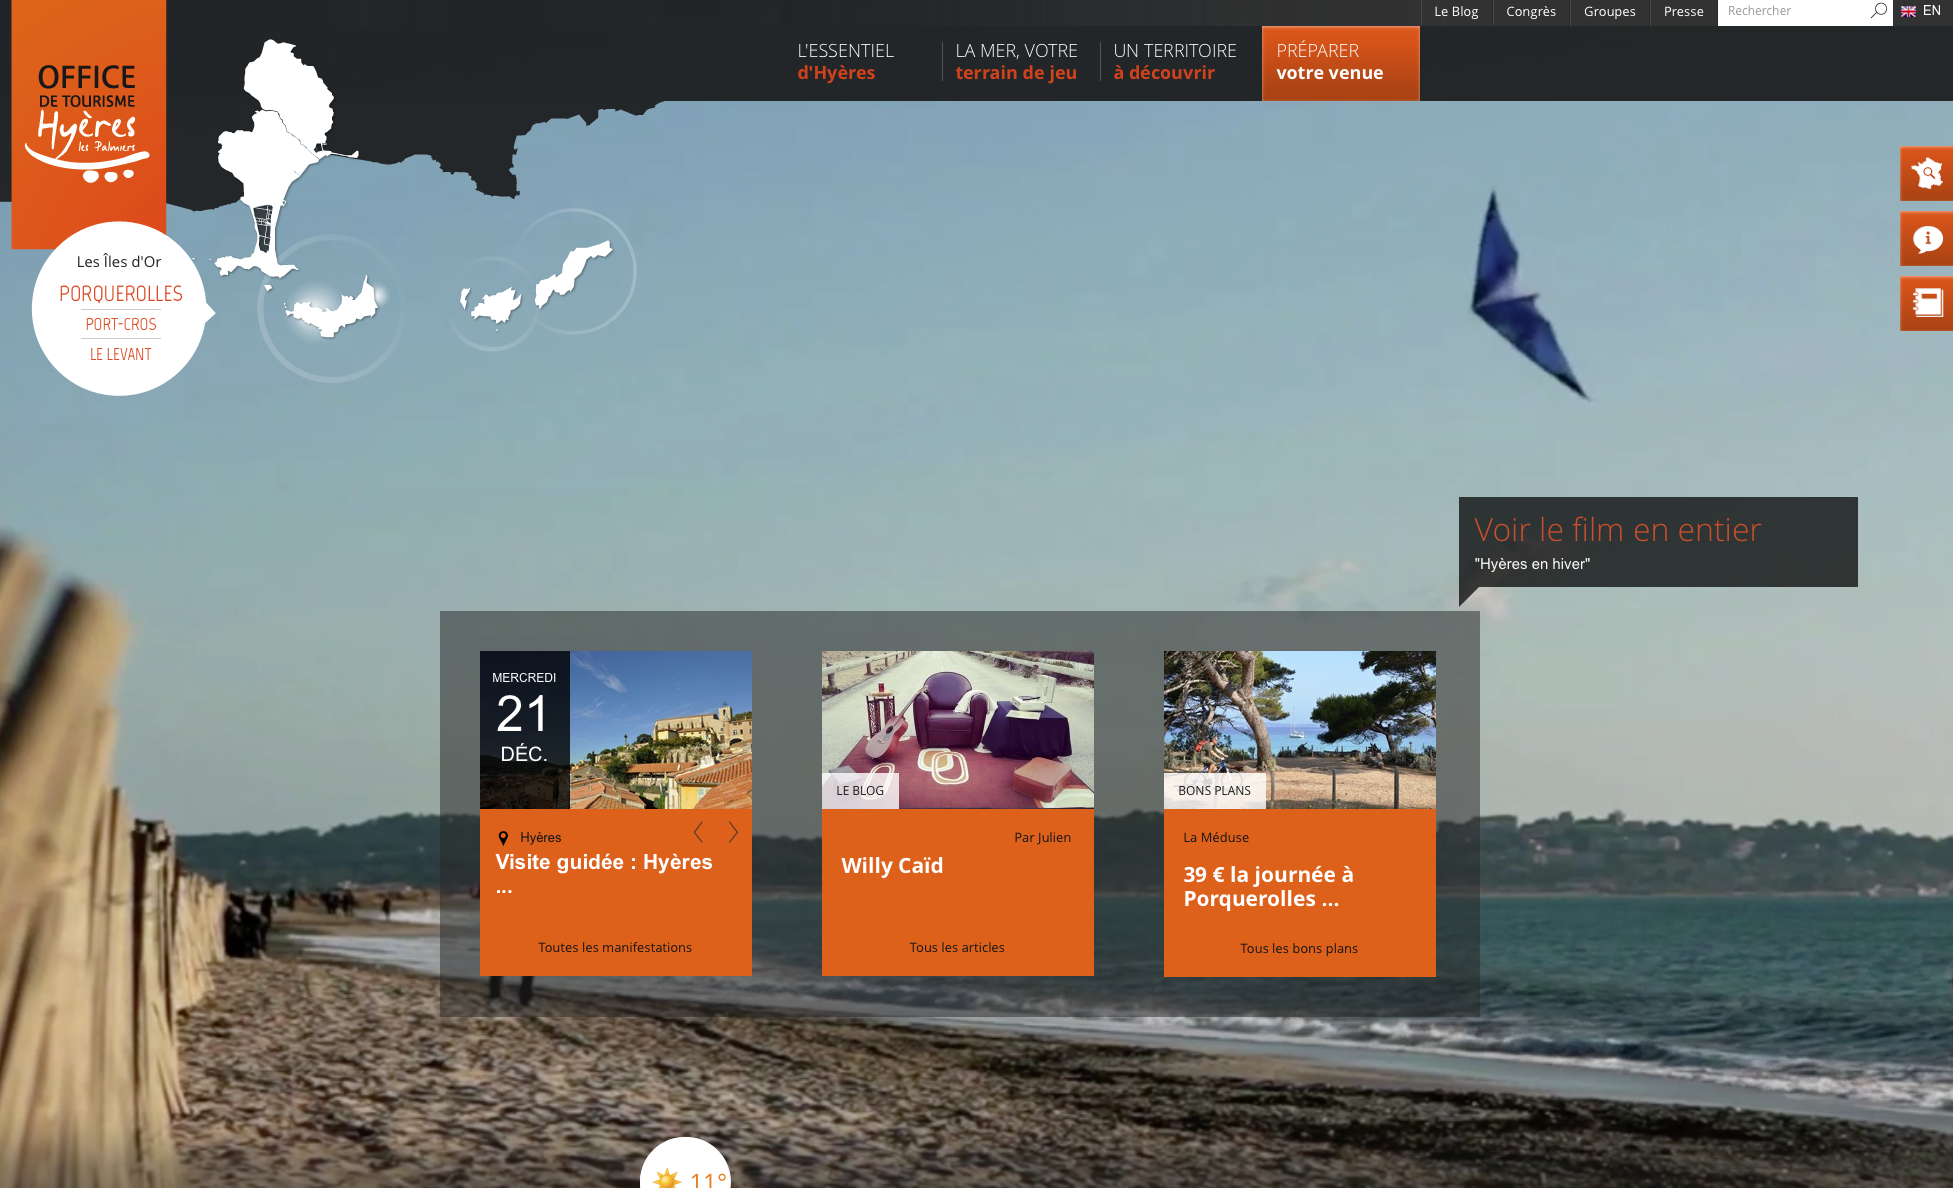 Tourism translation for the Hyeres tourism office